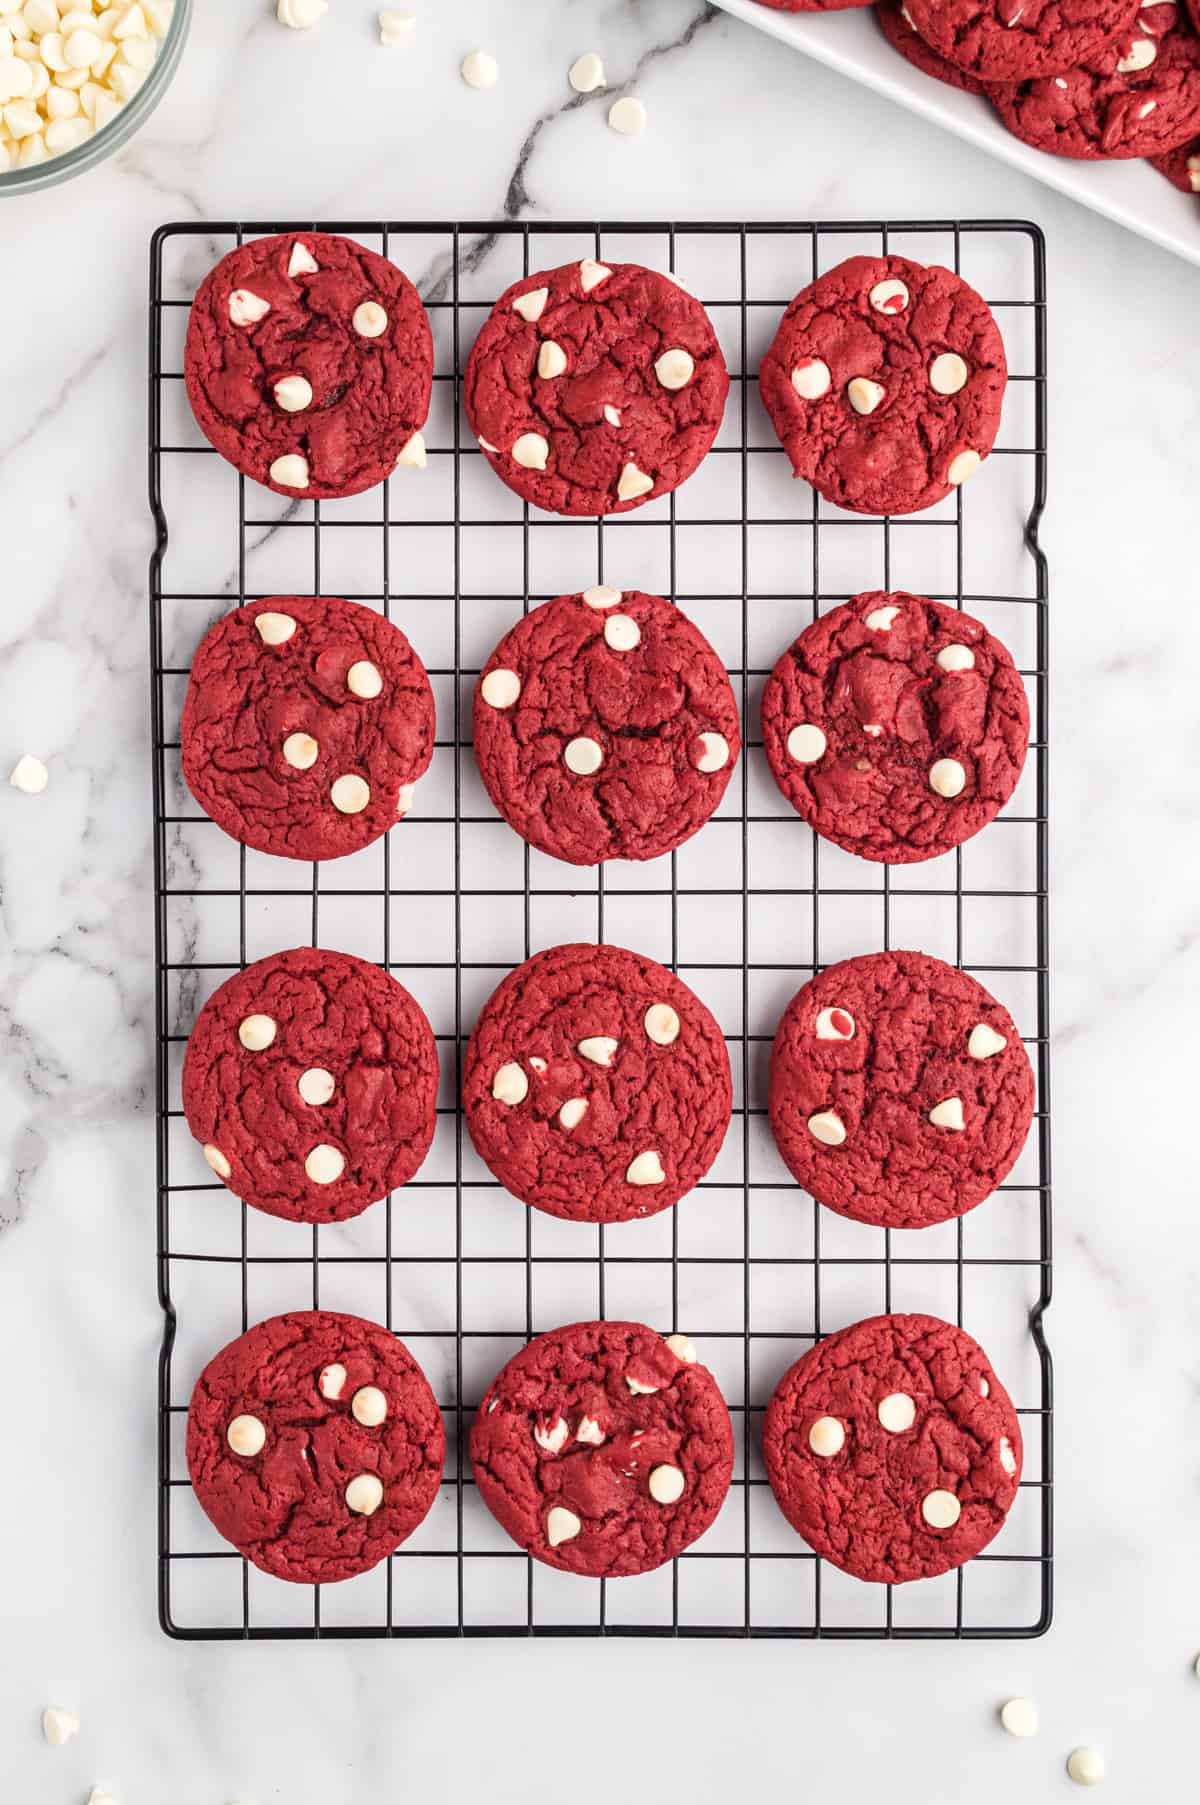 red velvet cake mix cookies with white chocolate chips on cooling rack